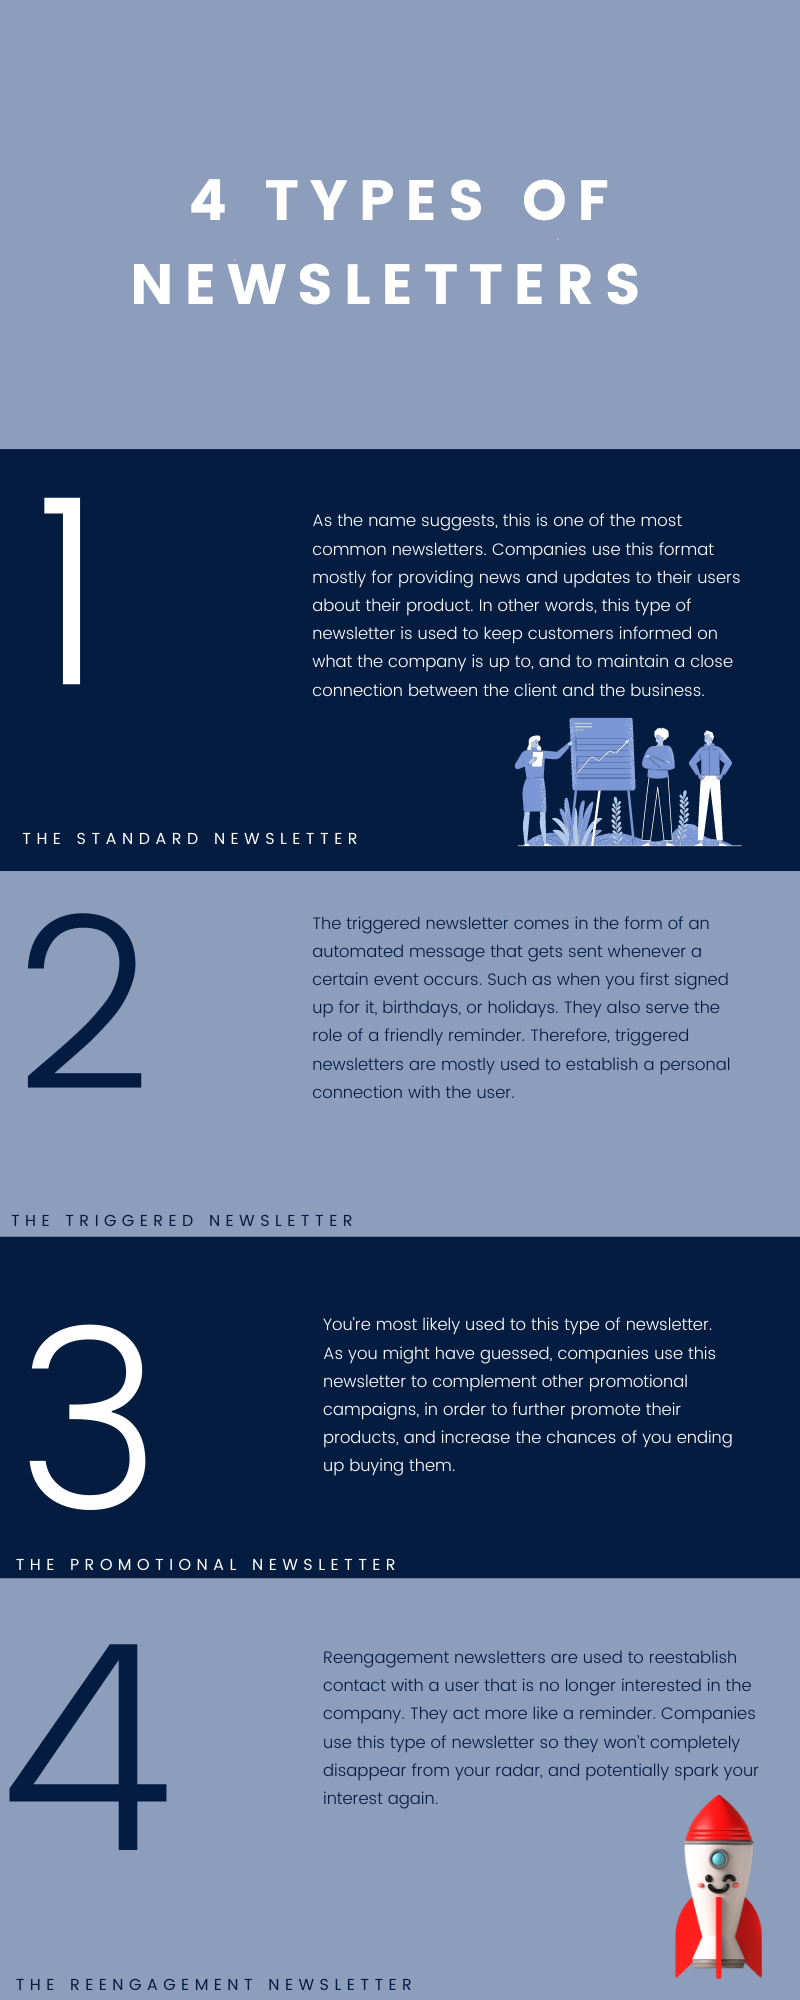 4 Types Of Newsletters -Infographic by Swell Country